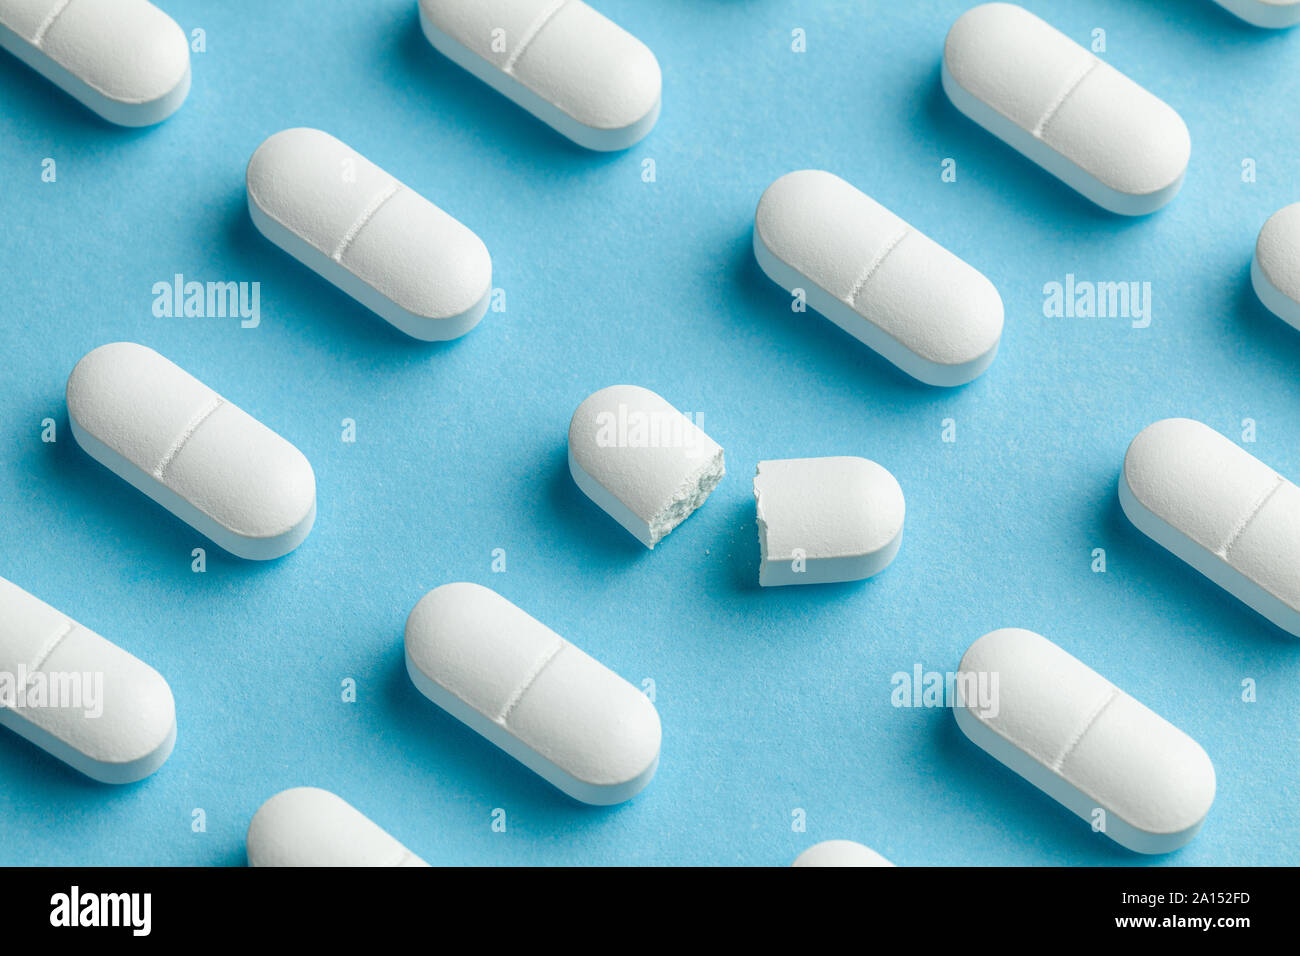 White pills on blue background. One tablet is broken in half, reducing the dose of the medicine. Stock Photo